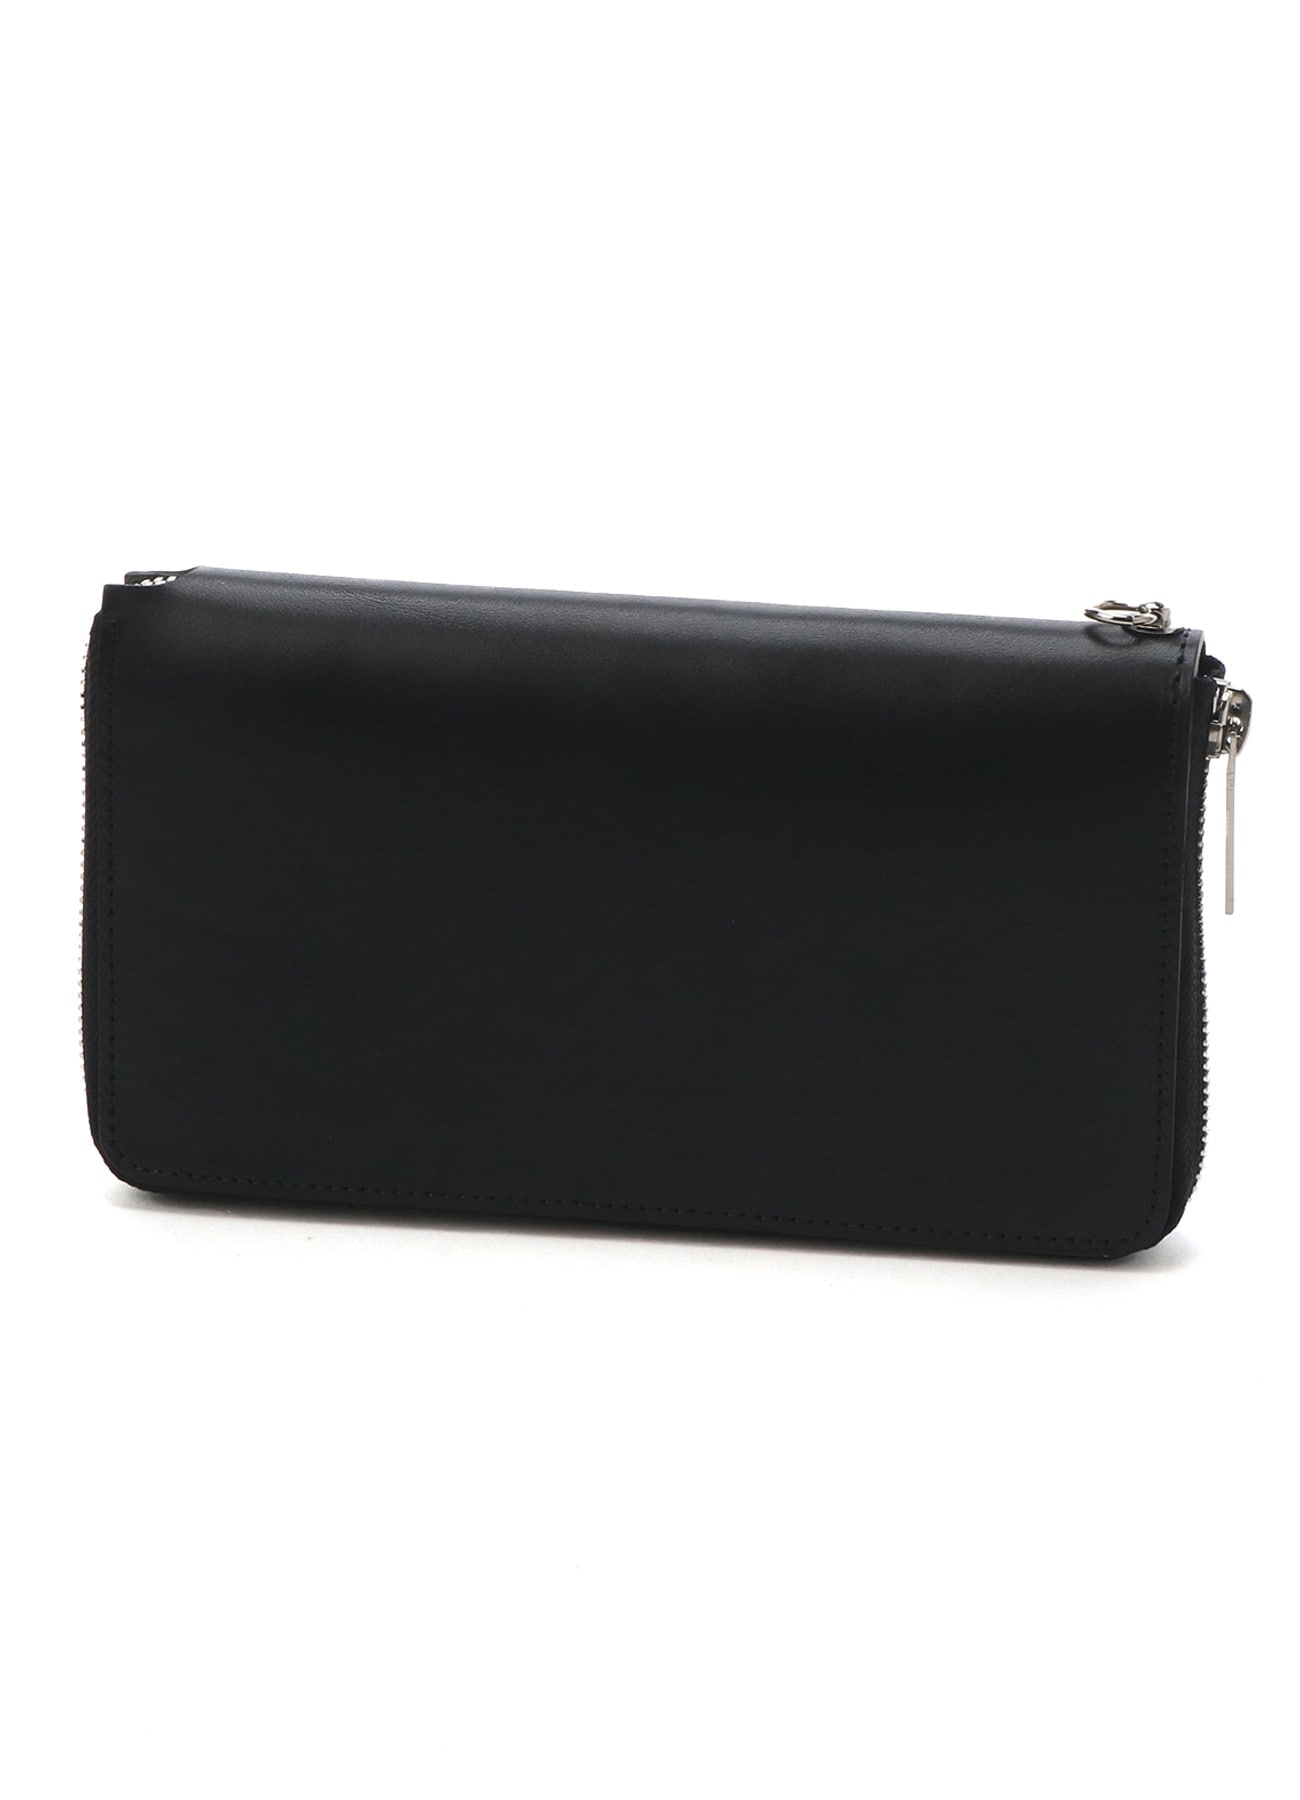 THICK UNFINISHED LEATHER ZIP WALLET L(FREE SIZE Black): Vintage 